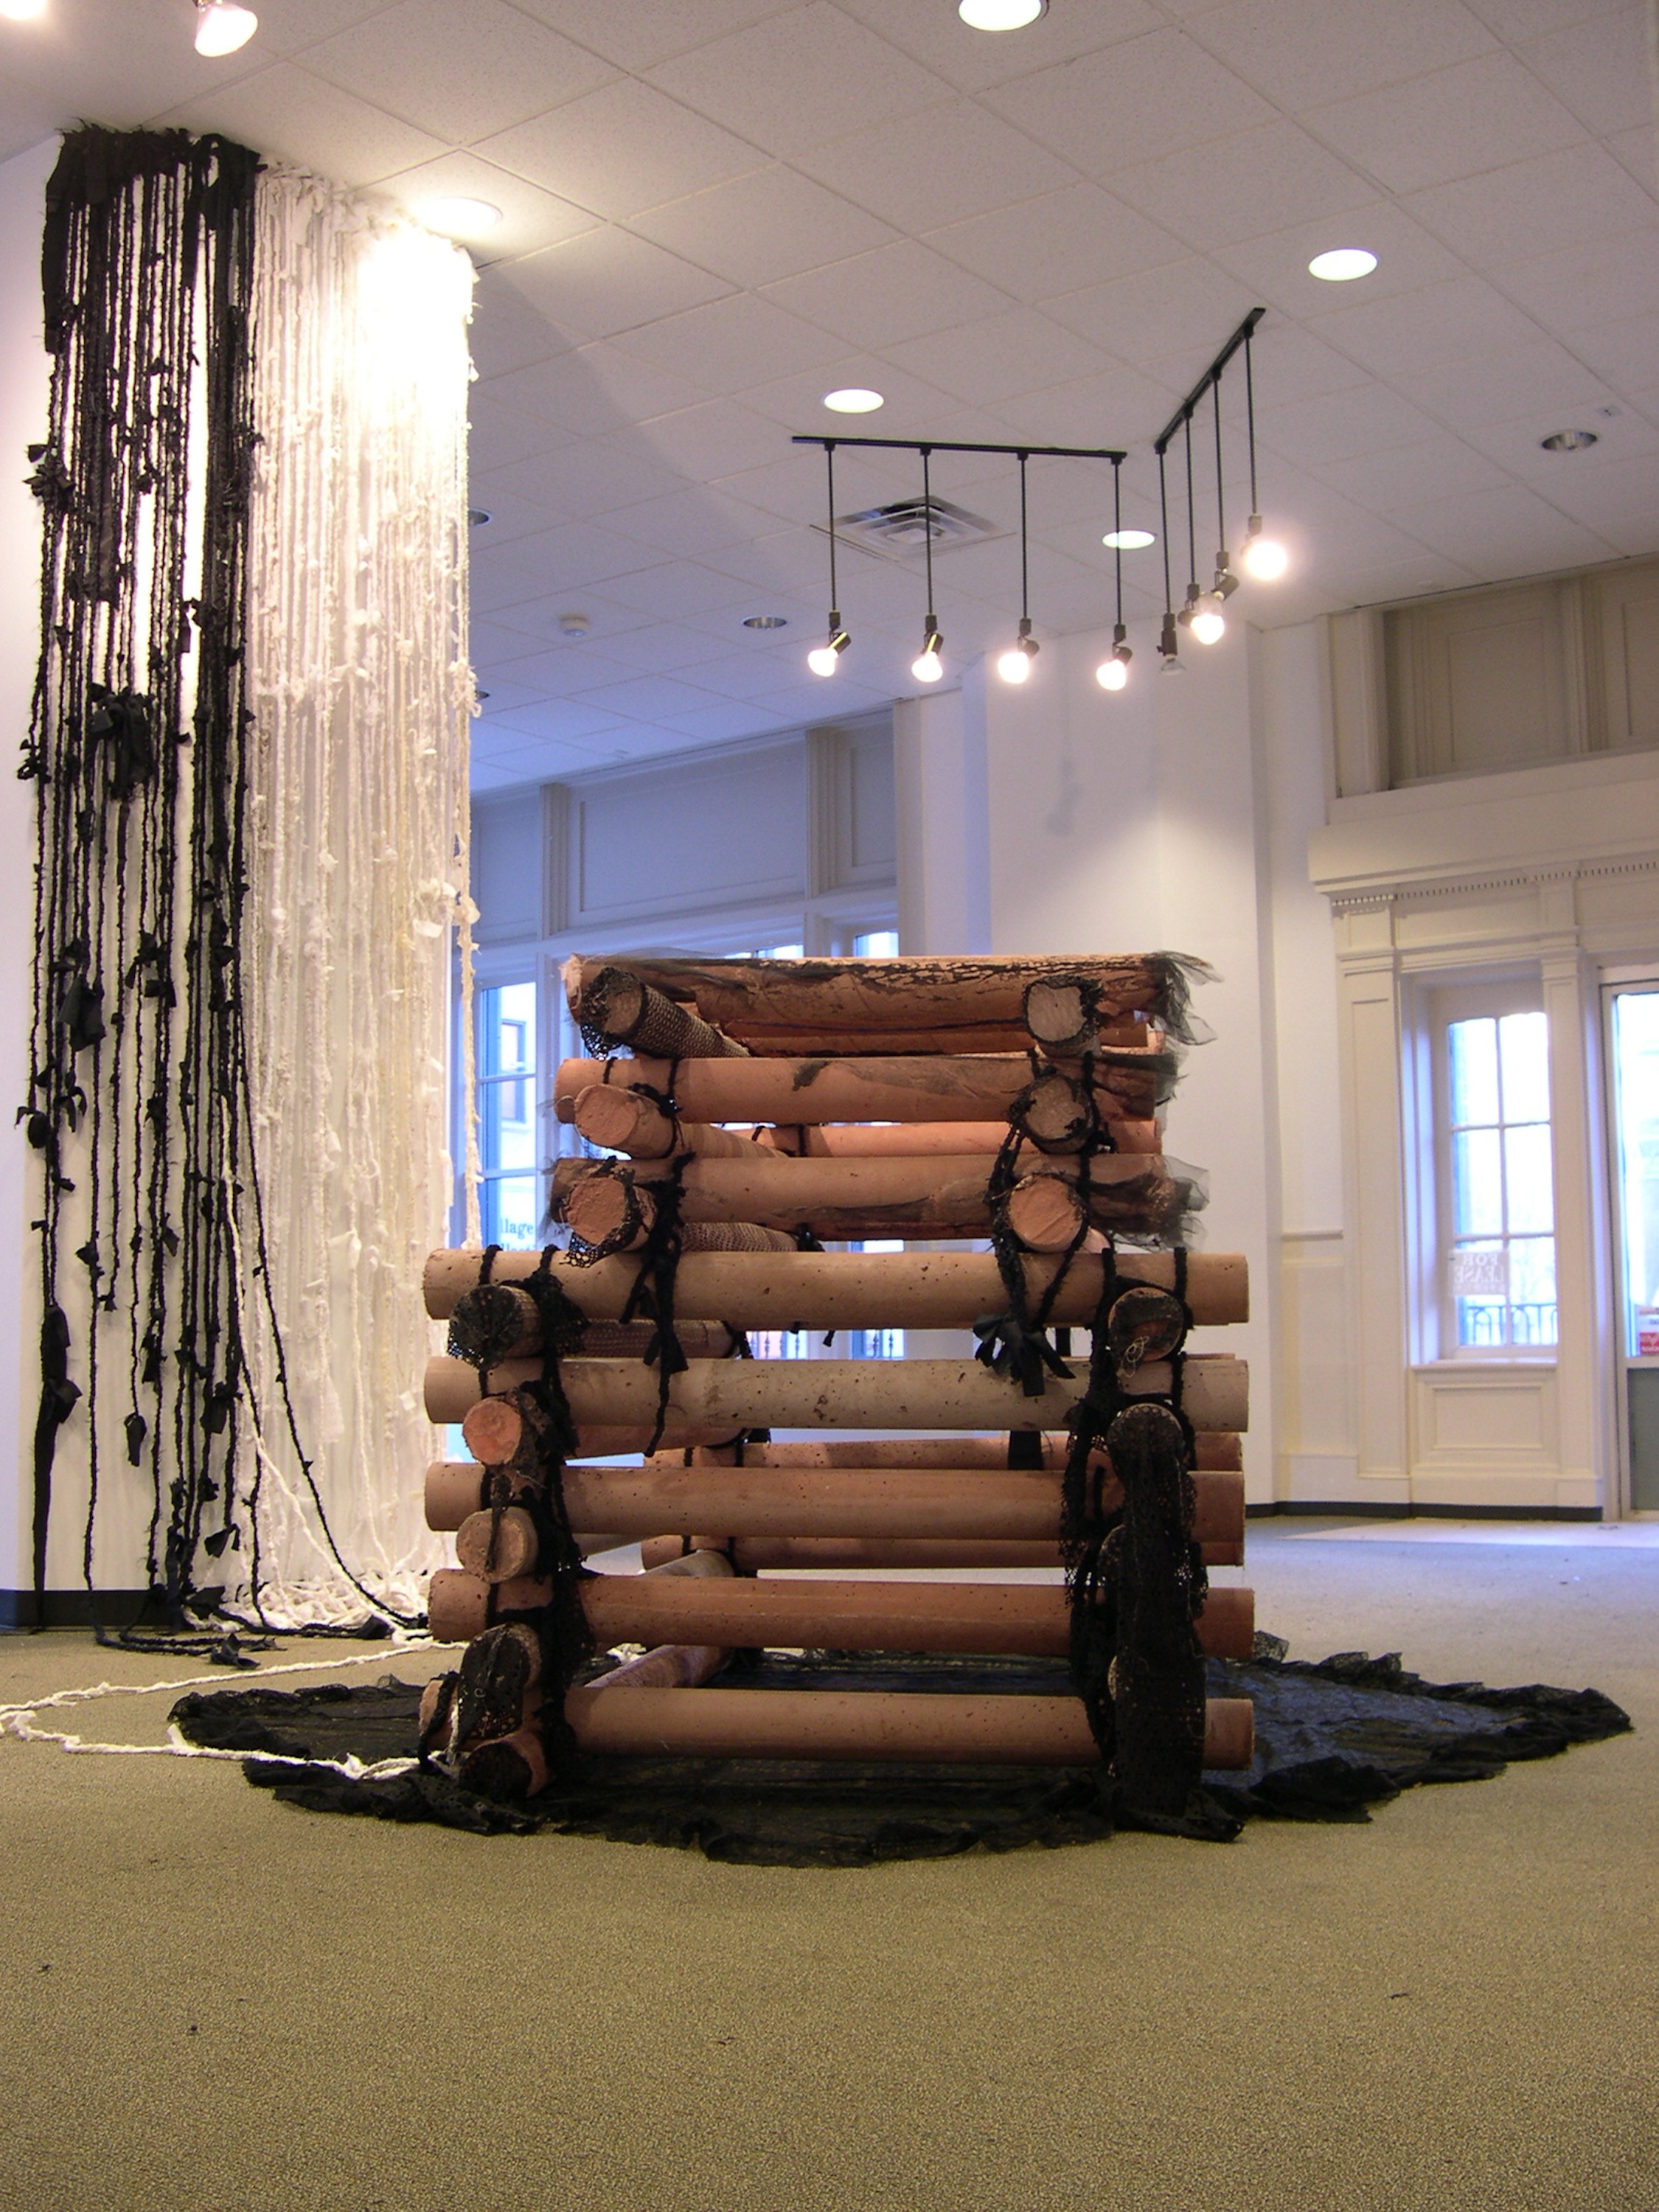   Cabin , 2008 Cast cement, lace and braided silk, 60x48x48 inches 